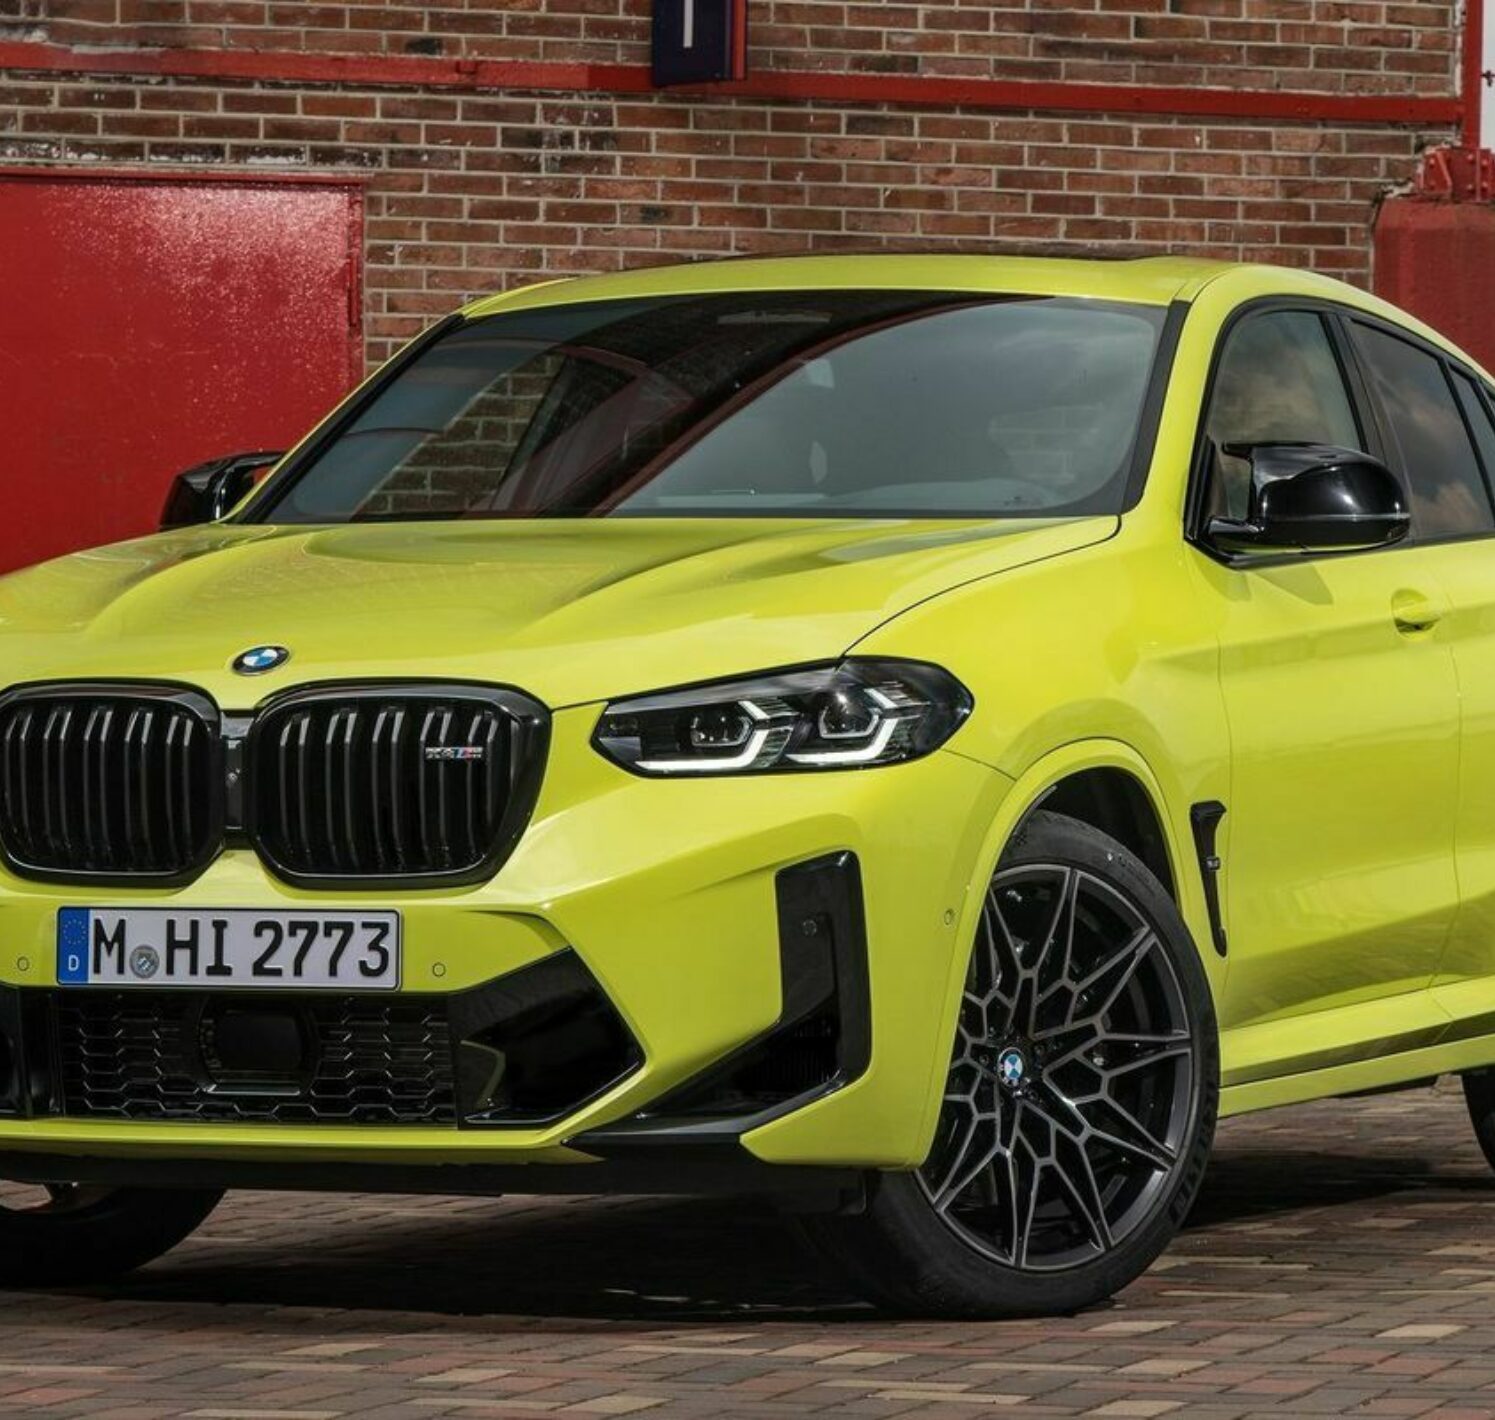 https://autofilter.sk/assets/images/x4-m/gallery/bmw-x4-m-competition-2022_09-galeria.jpg - obrazok